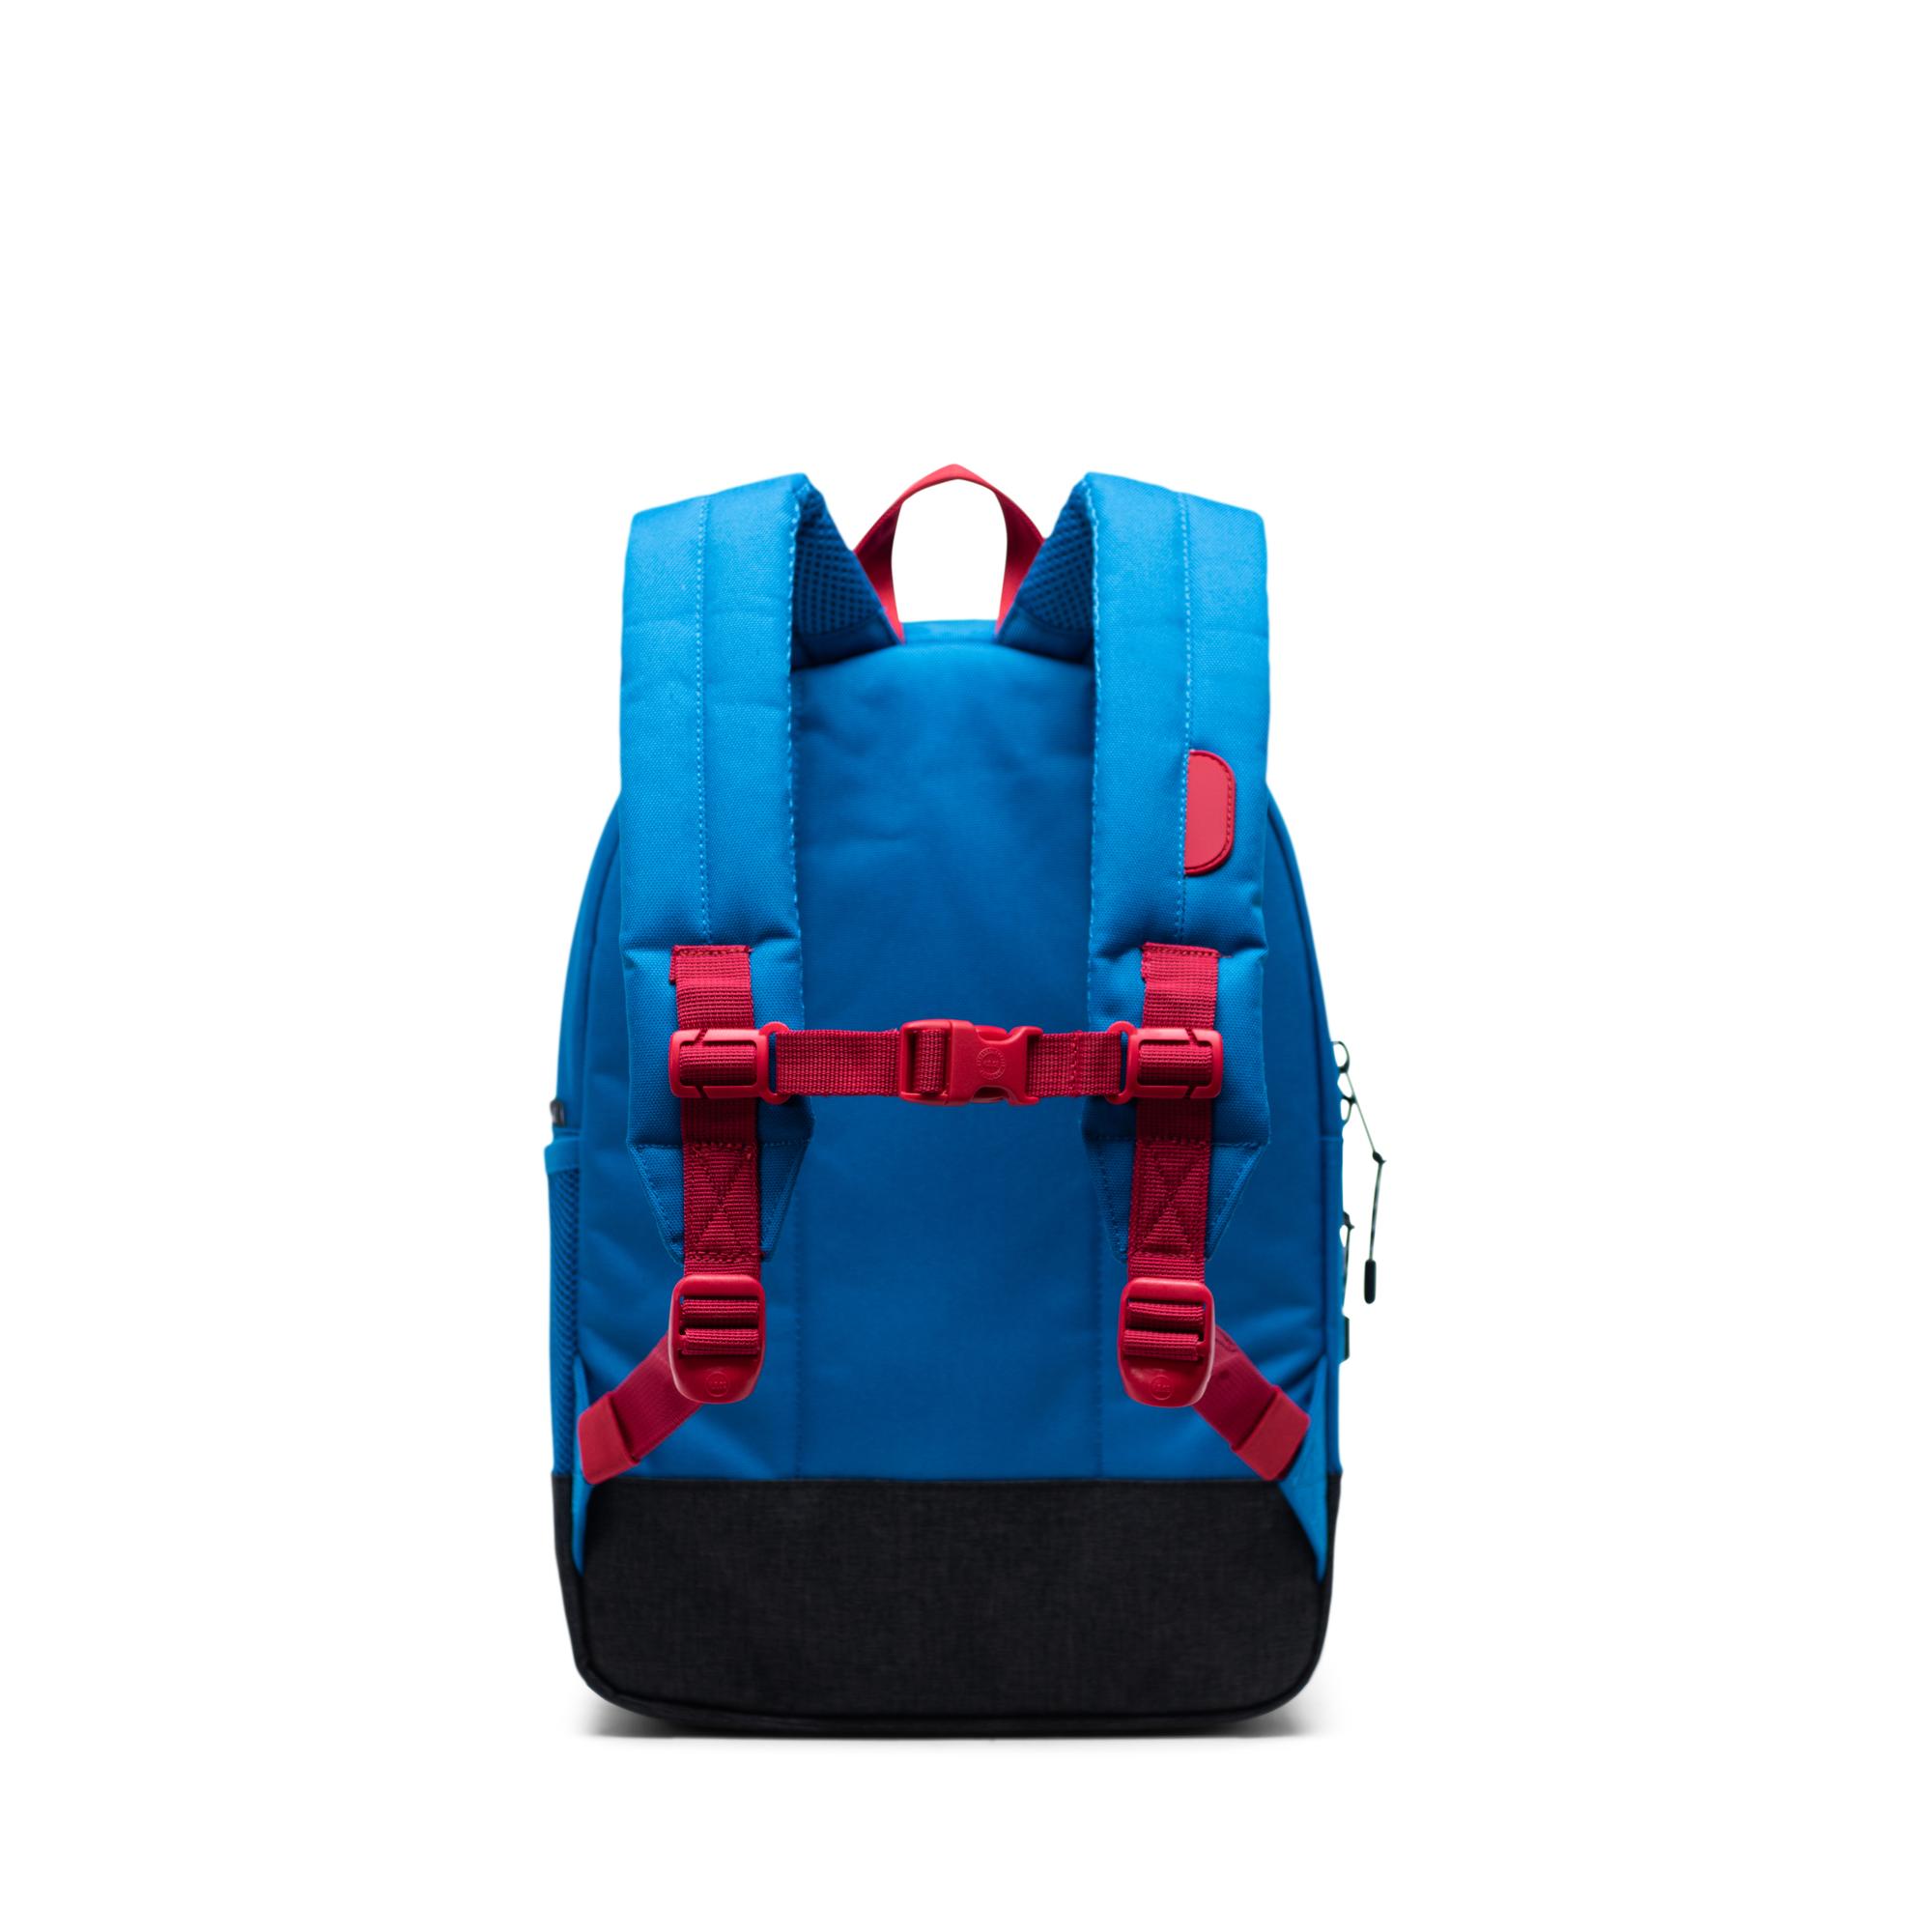 Heritage Backpack Youth 16L